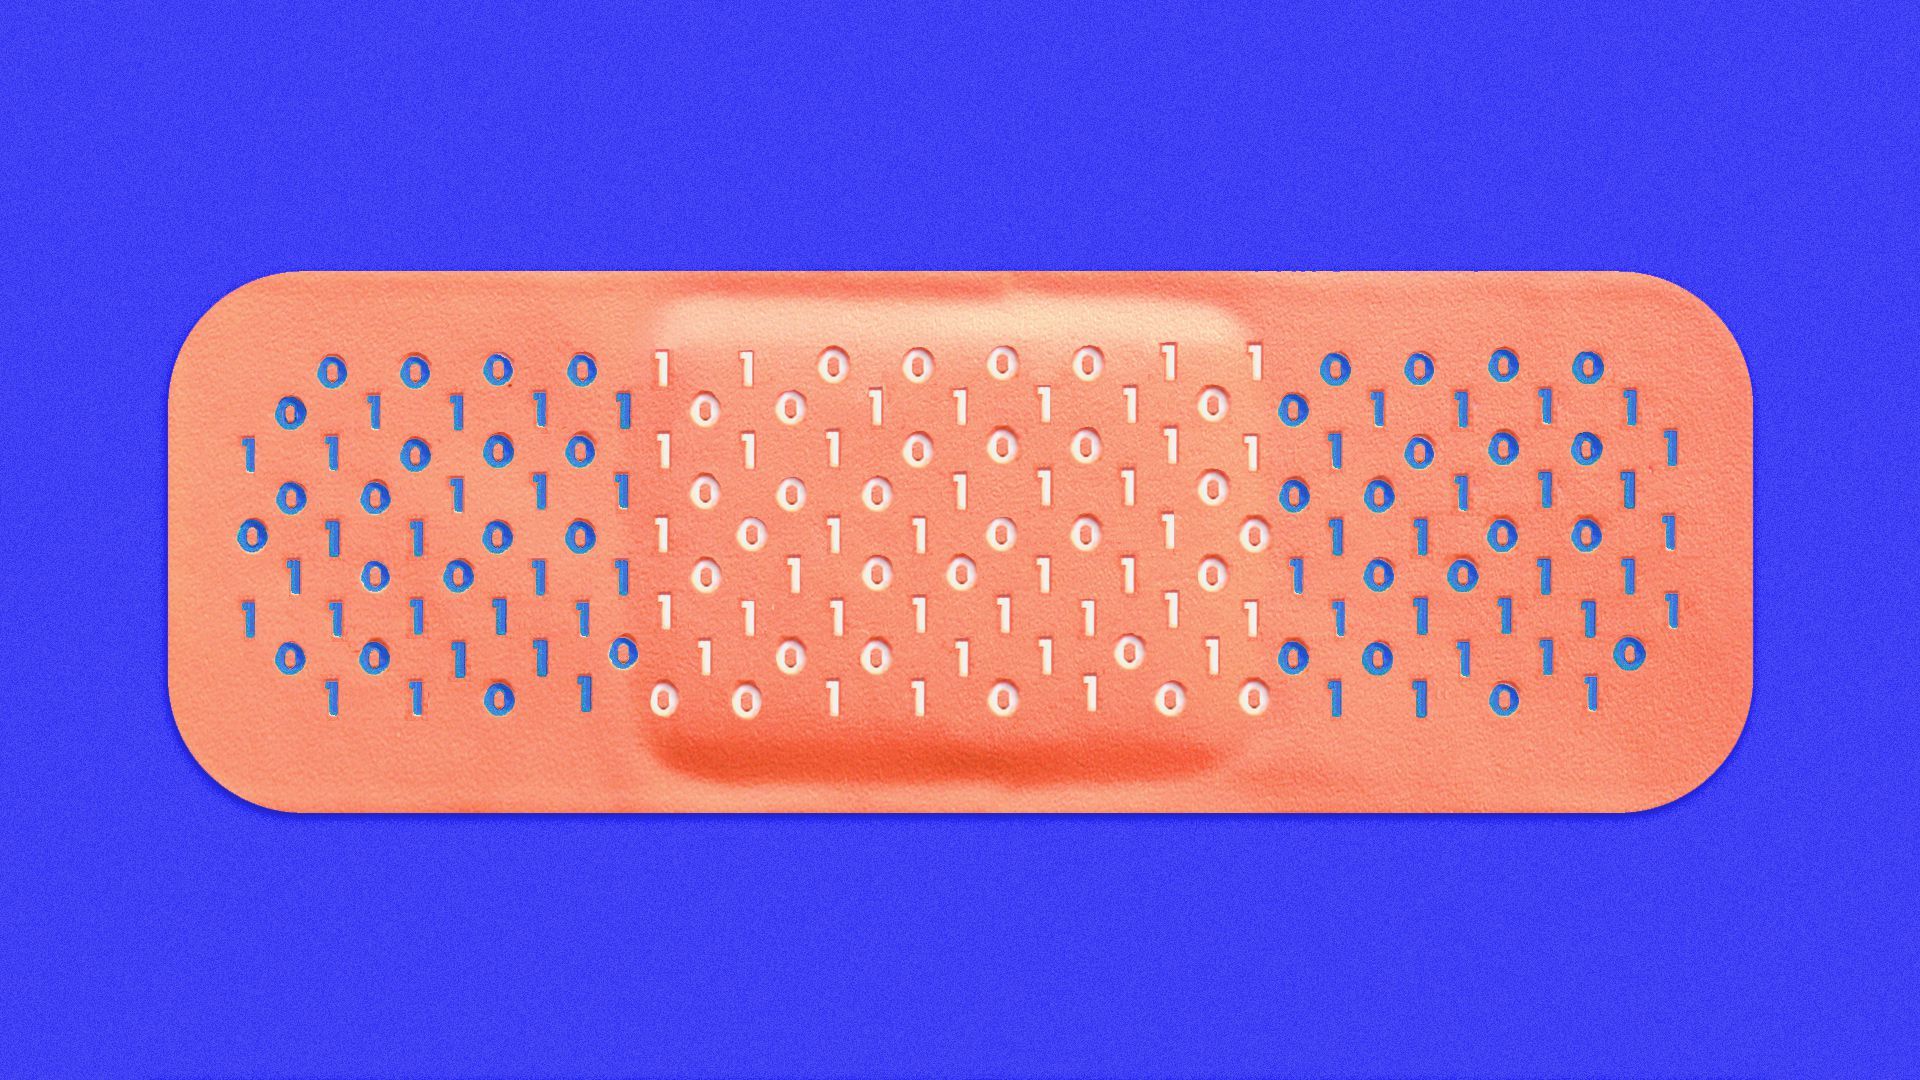 Illustration of a band-aid with binary code